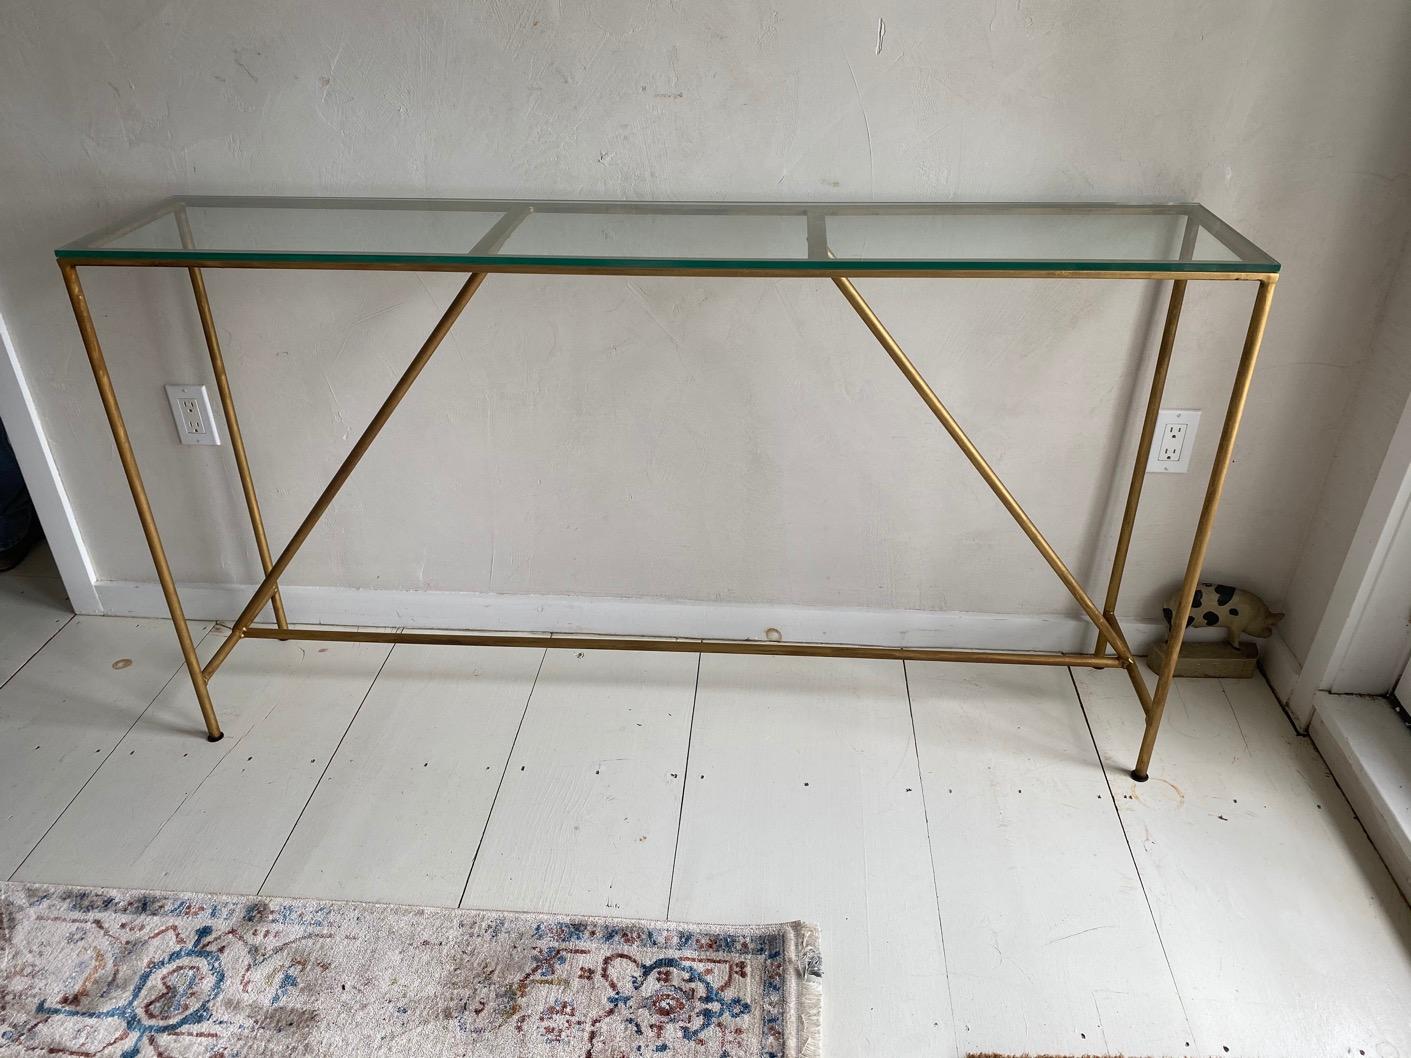 Elegant, contemporary and rustic at the same time with glass top and custom made metal base with a gold finish. Great as console or sofa table. Top and base can be sold separately by adding a top of your choice, be it glass, stone or wood. Base can